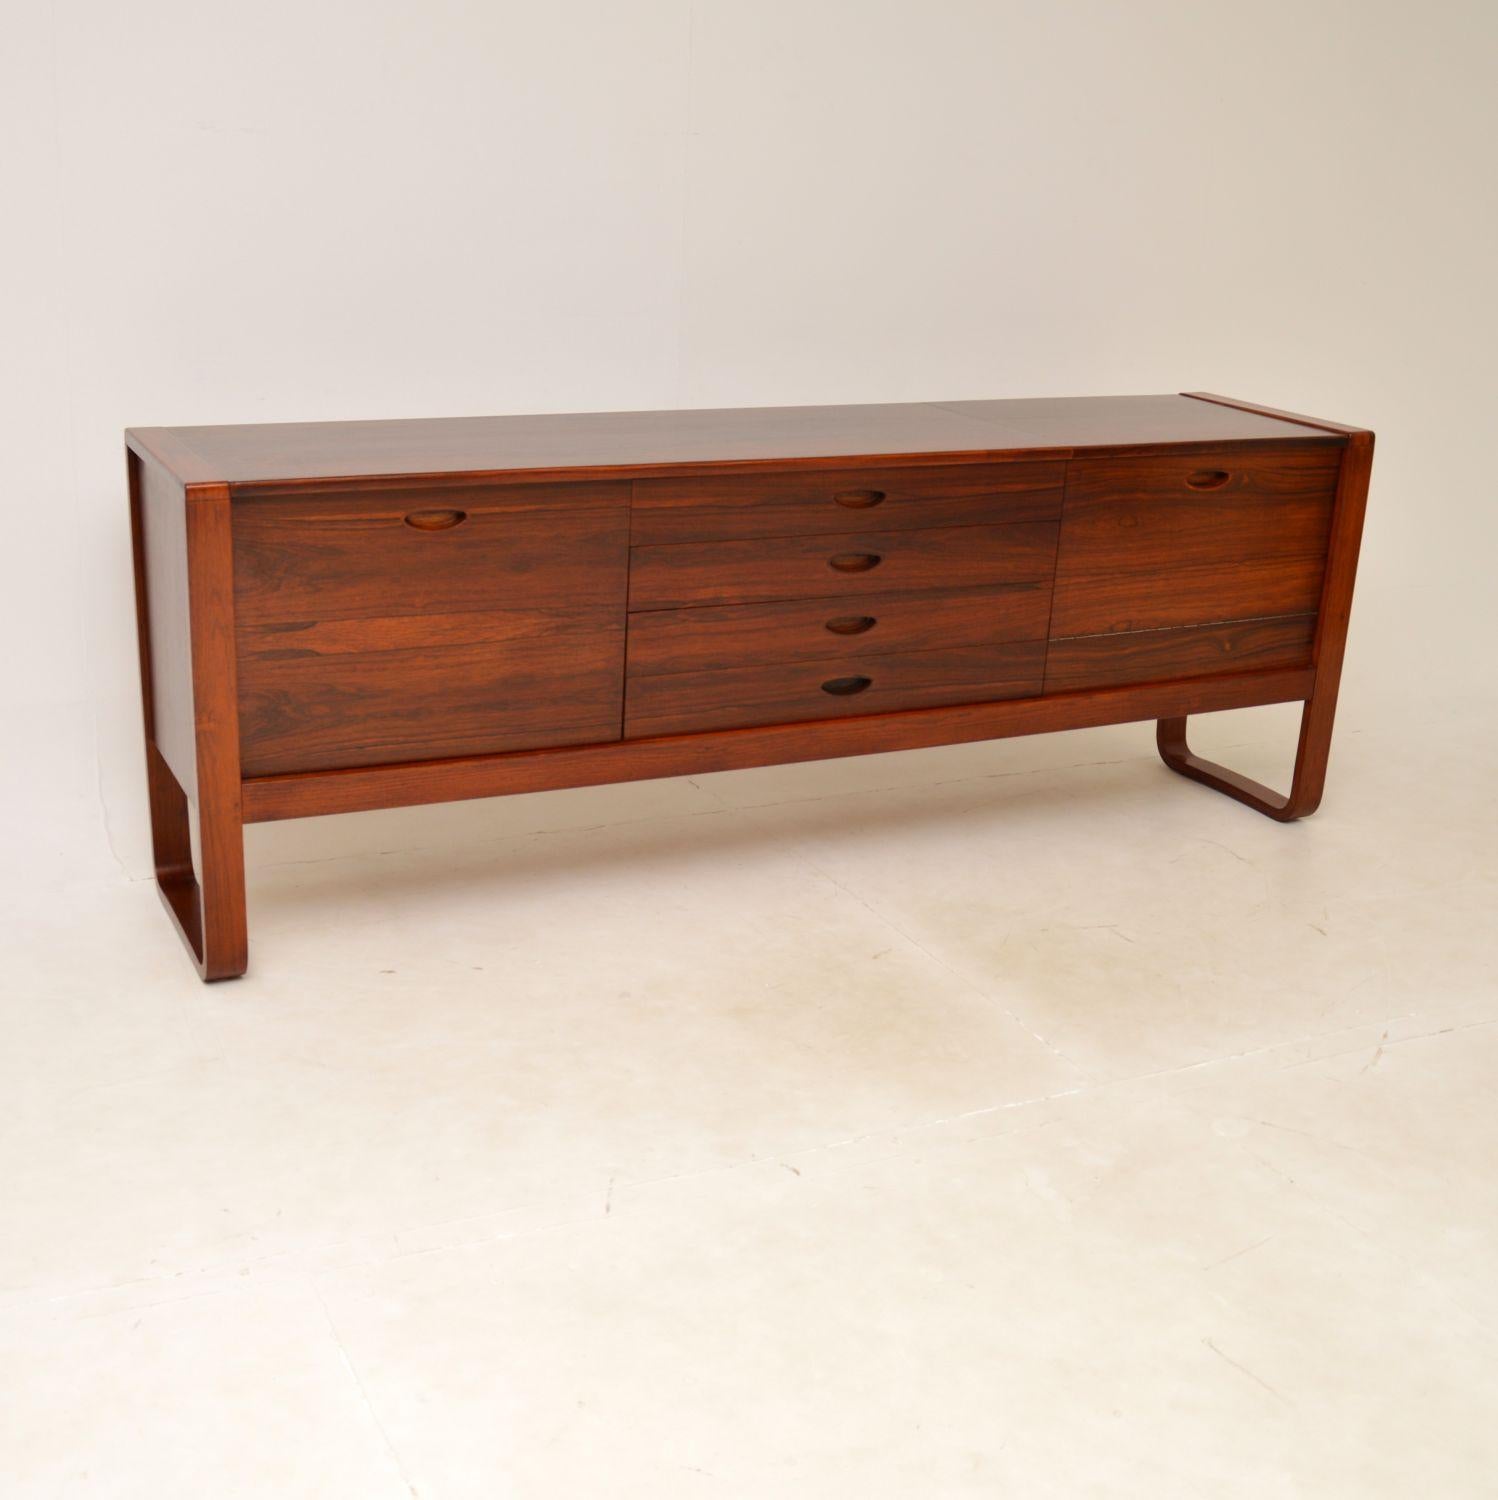 An absolutely superb vintage sideboard. This was made in England, it was designed by Gunther Hoffstead for Uniflex, it dates from the 1960’s.

The design is stunning, this is extremely well made with many fine features. The U shaped sides are